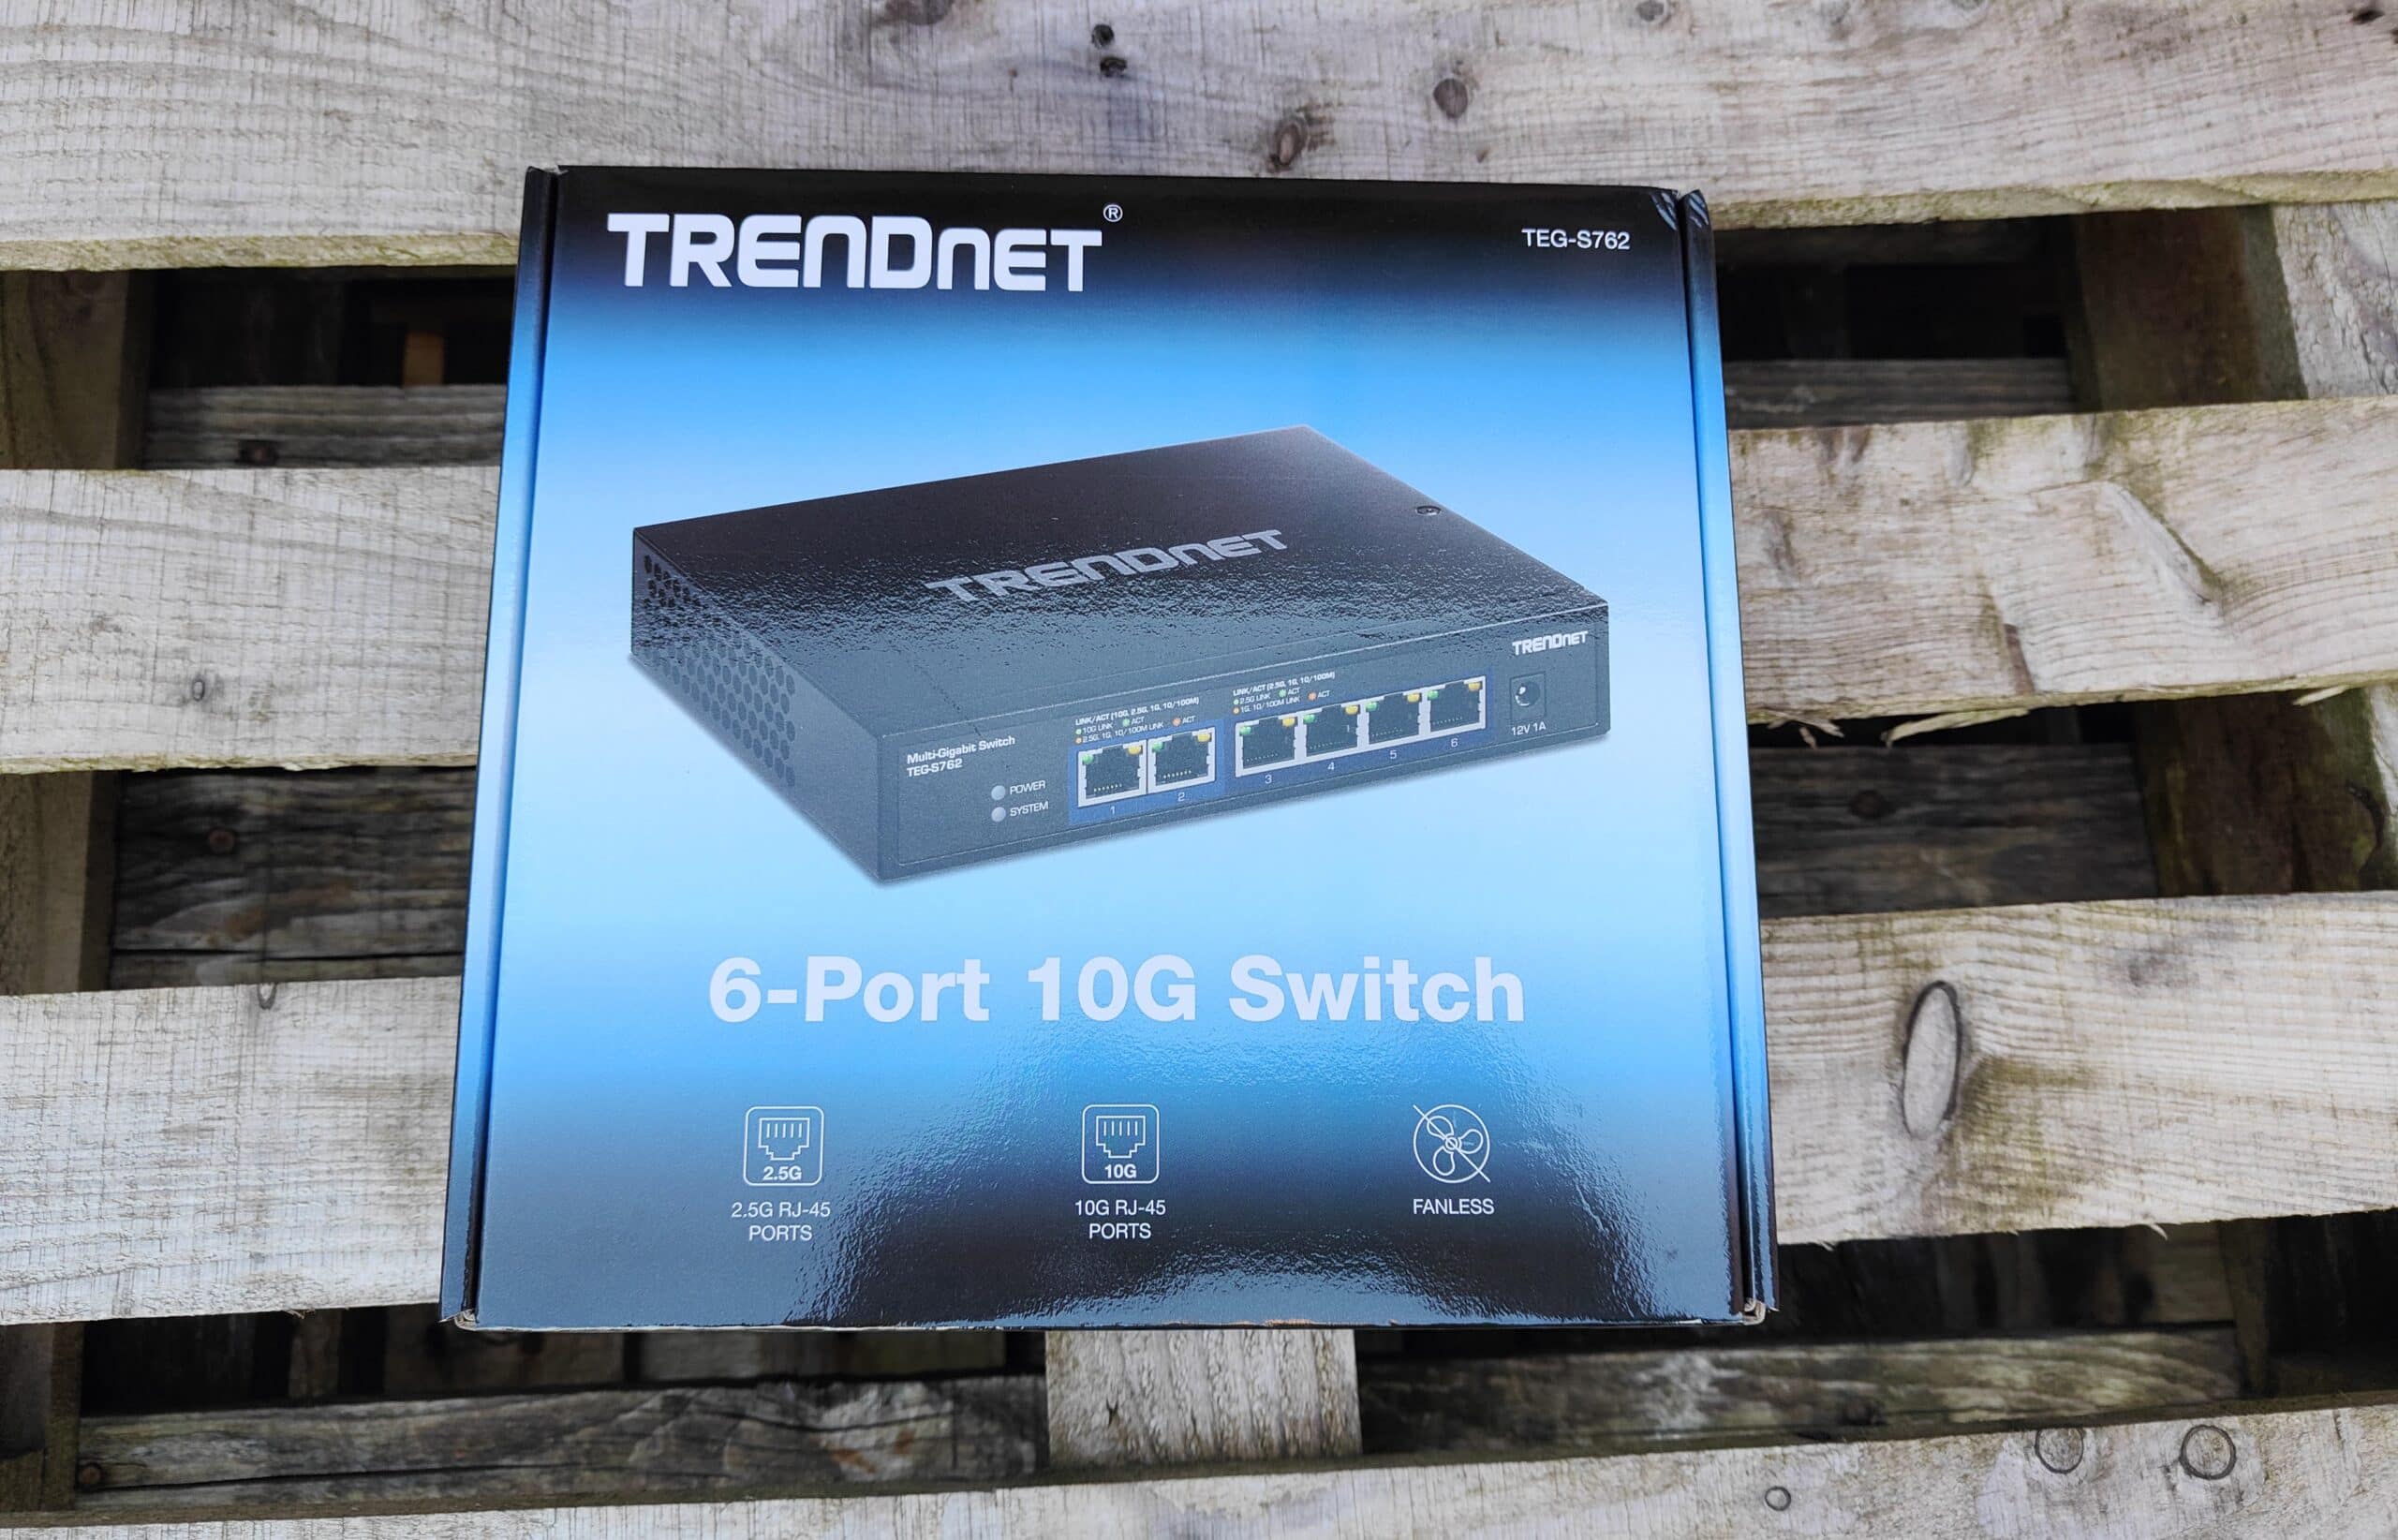 TRENDnet TEG-S762 Switch Review – Affordable 10Gbps Ethernet